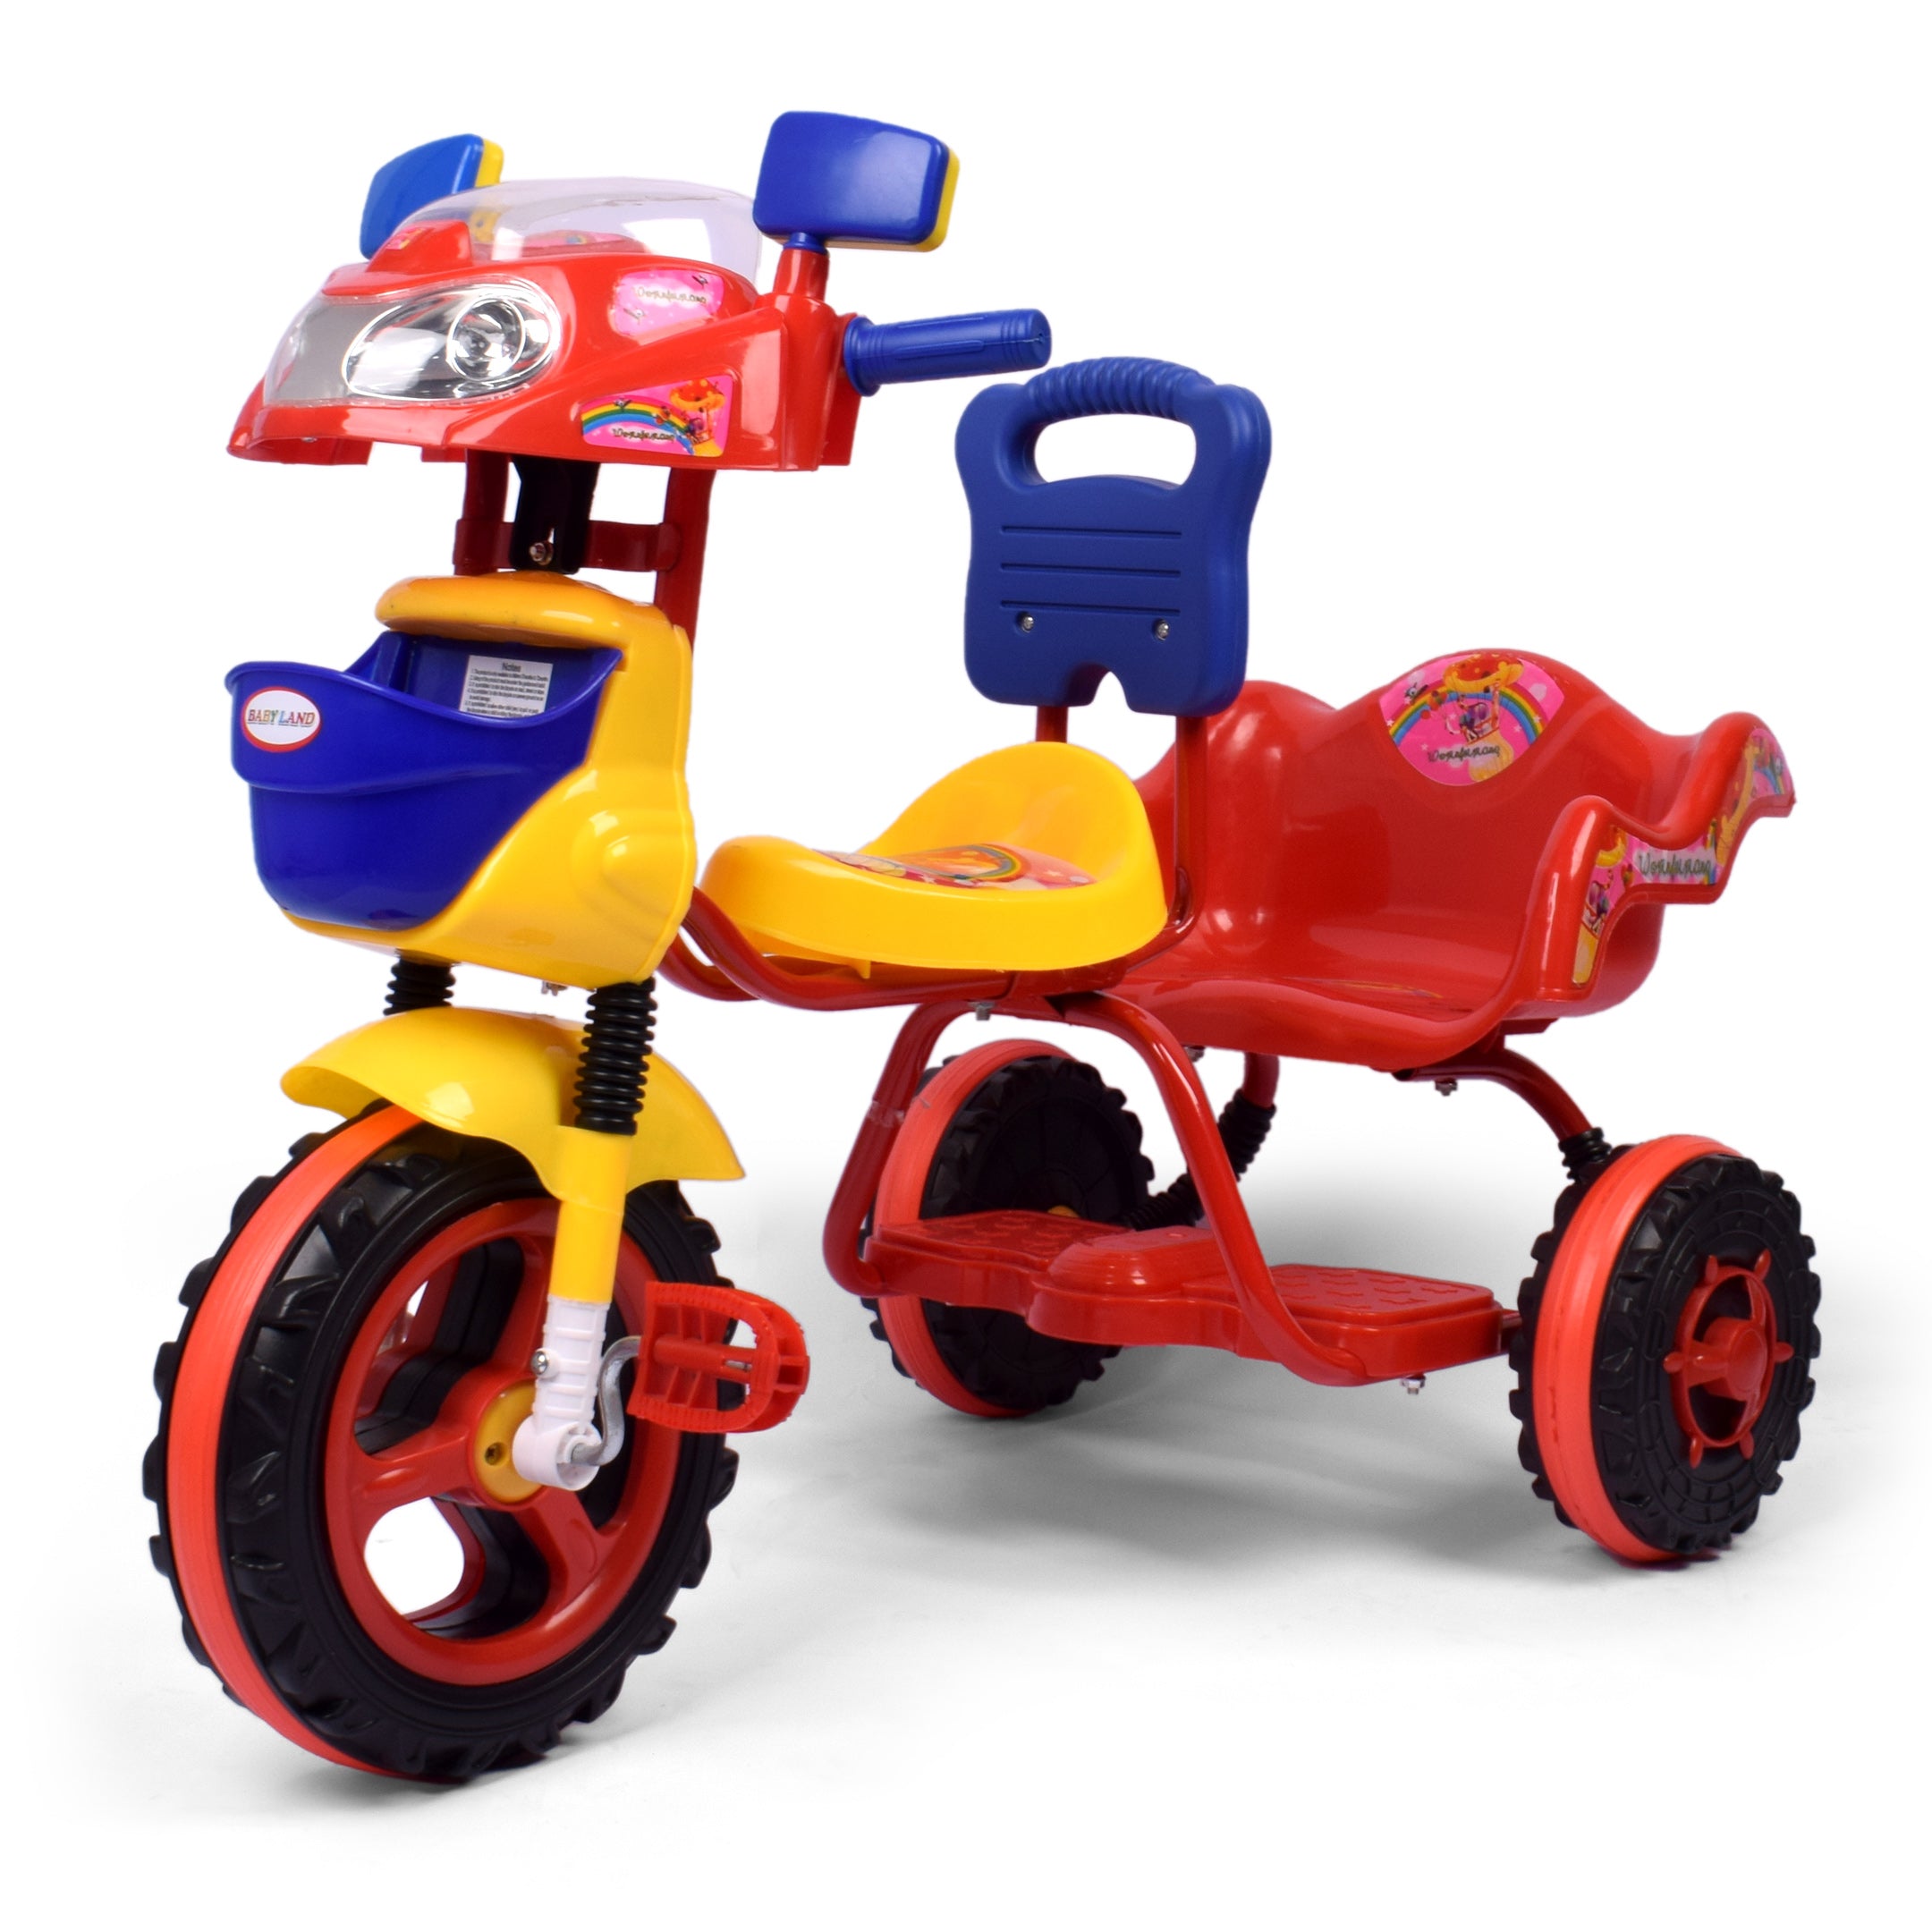 Kids Car Shape Twin Seater Tricycle - Multicolor